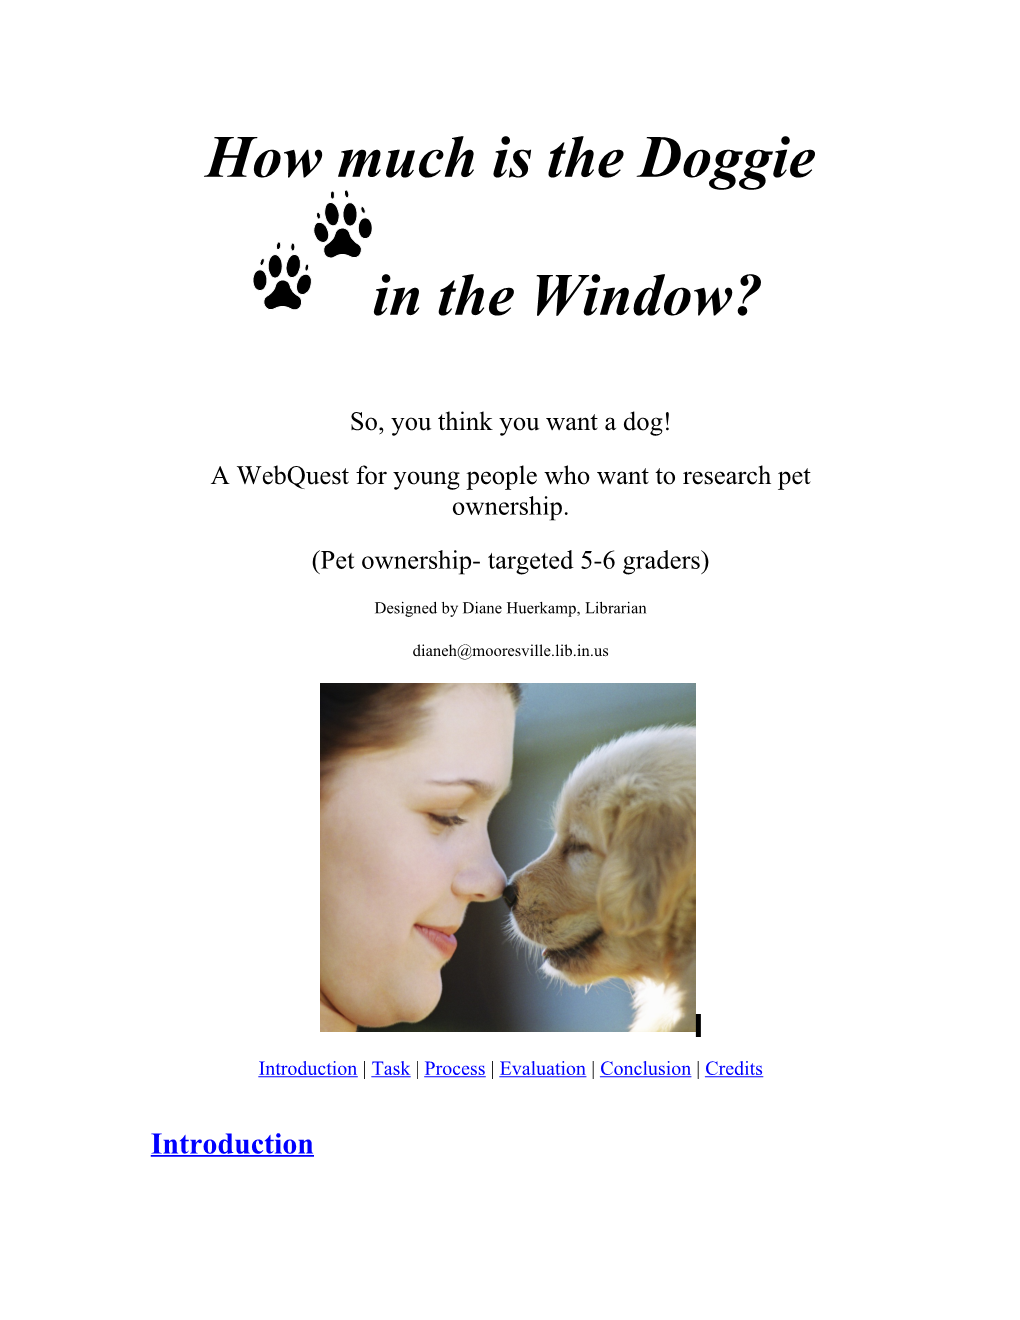 How Much Is the Doggie in the Window